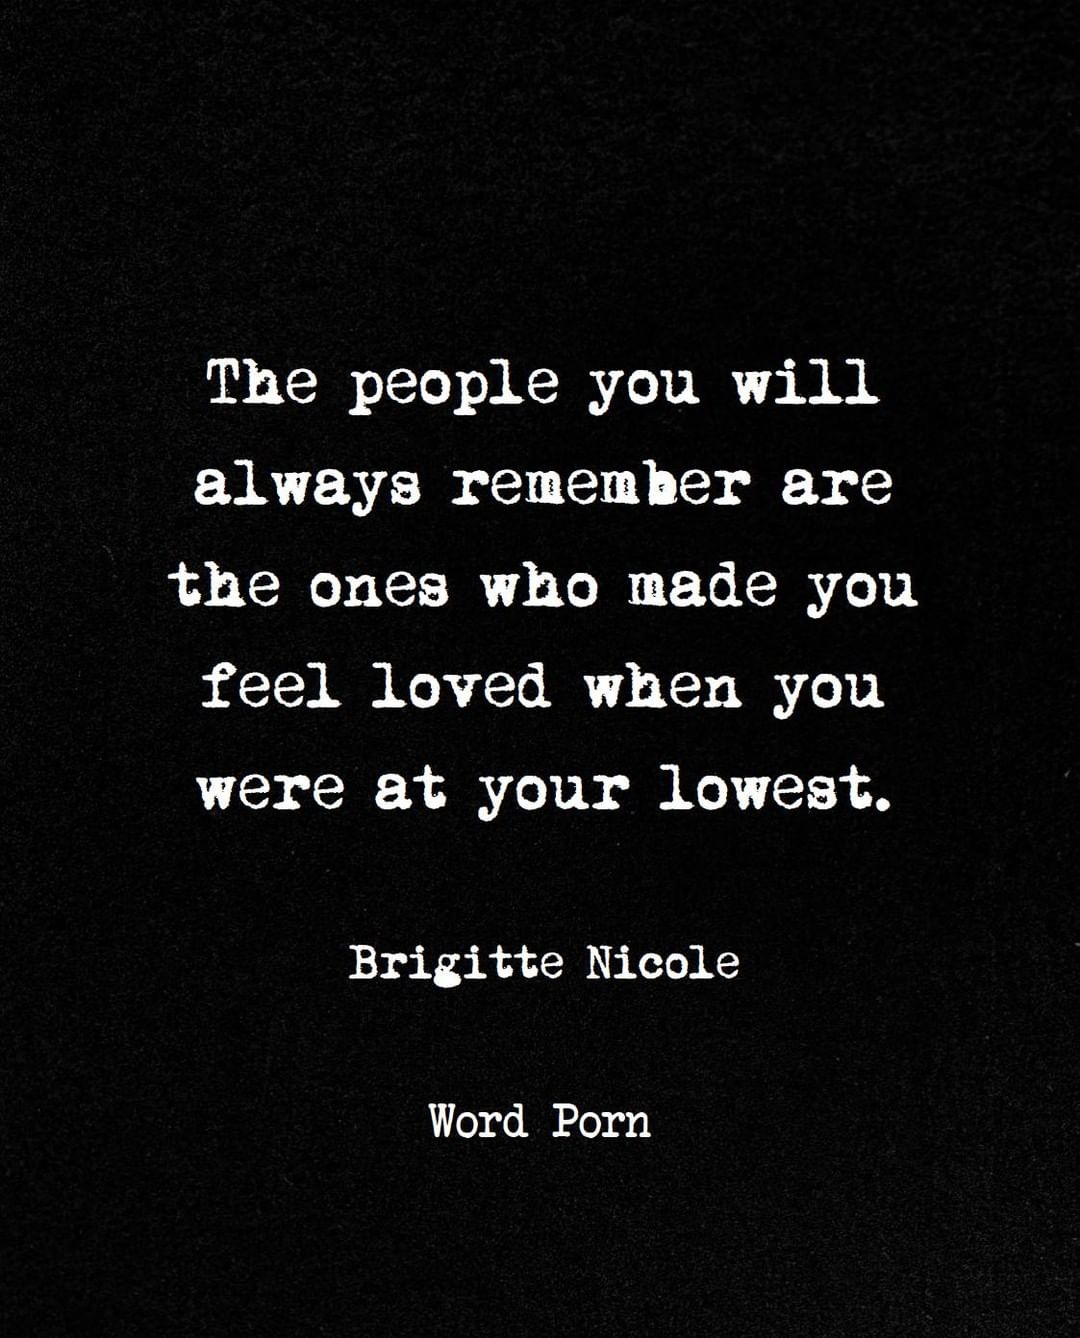 The people you will always remember are the ones who made you feel loved when you were at your lowest. Brigitte Nicole.